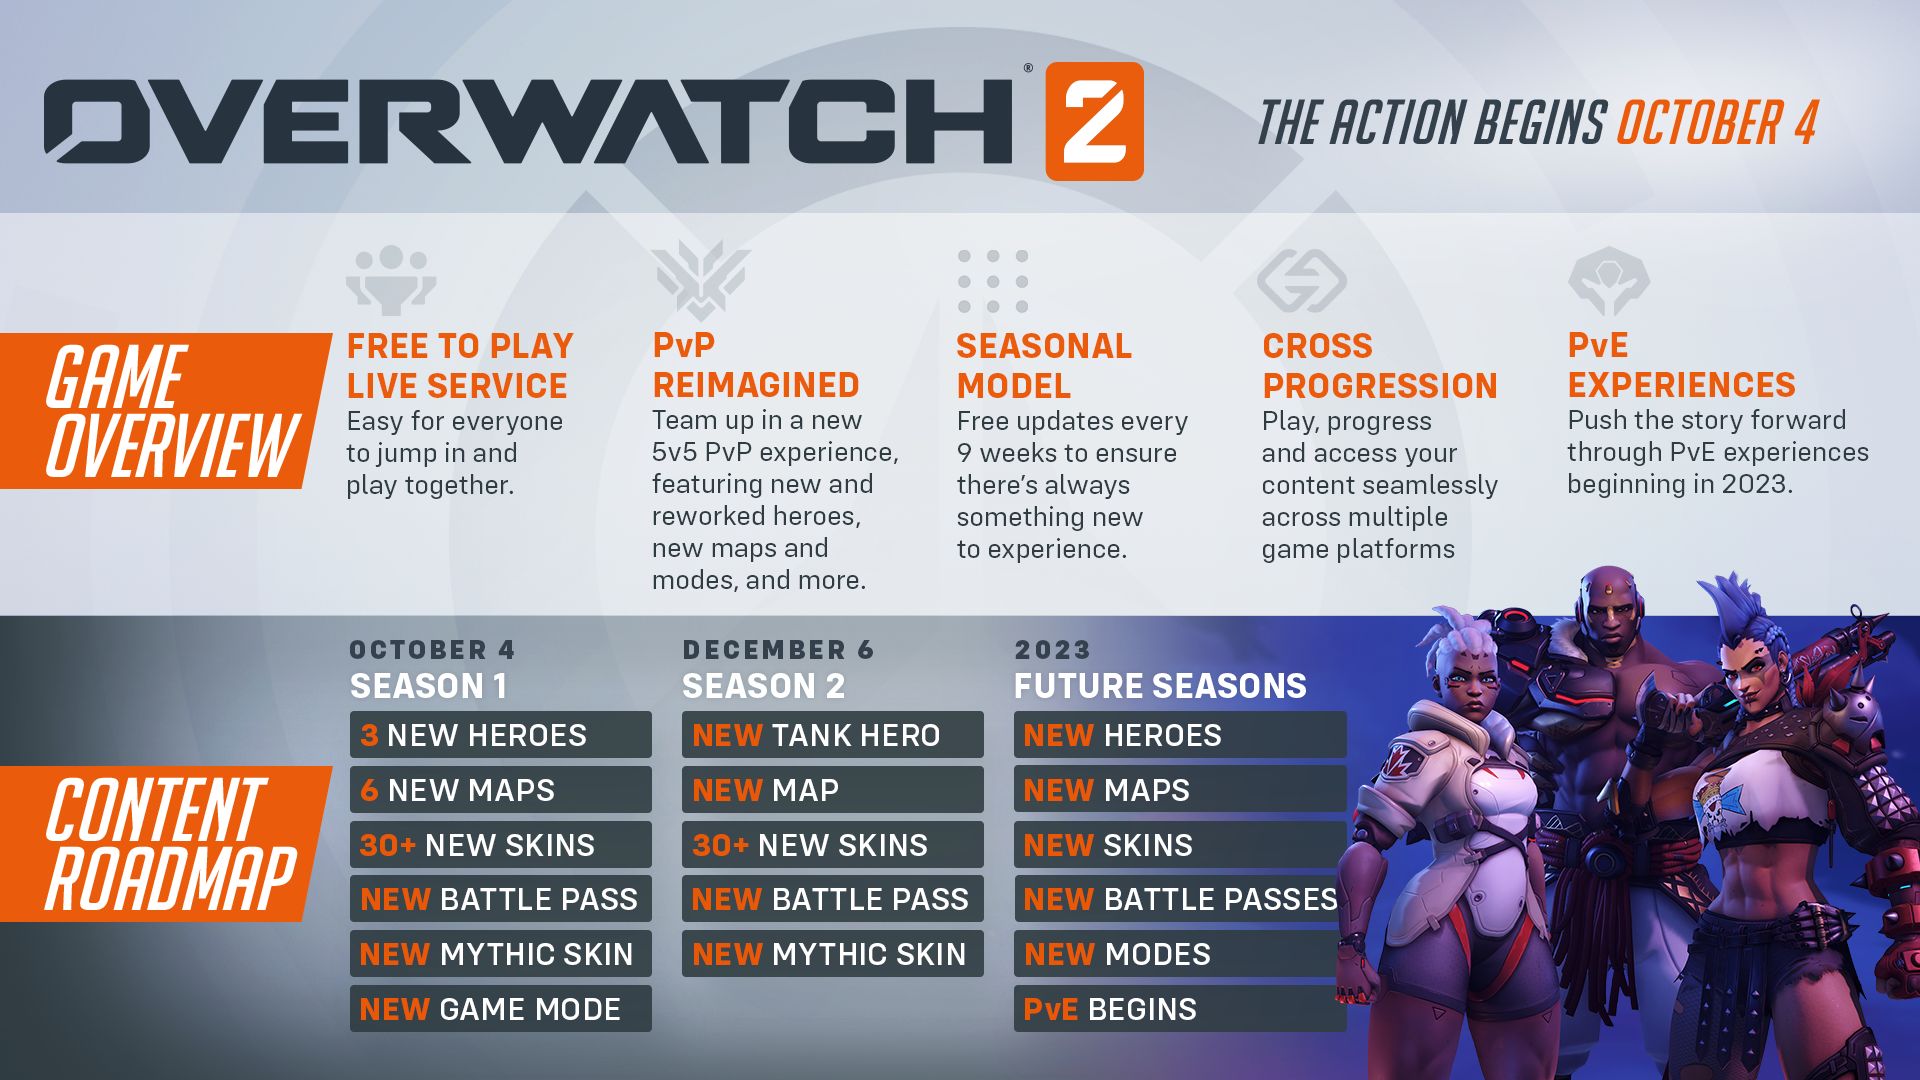 Overwatch 2 season 3 release date, map, mythic skins, and changes